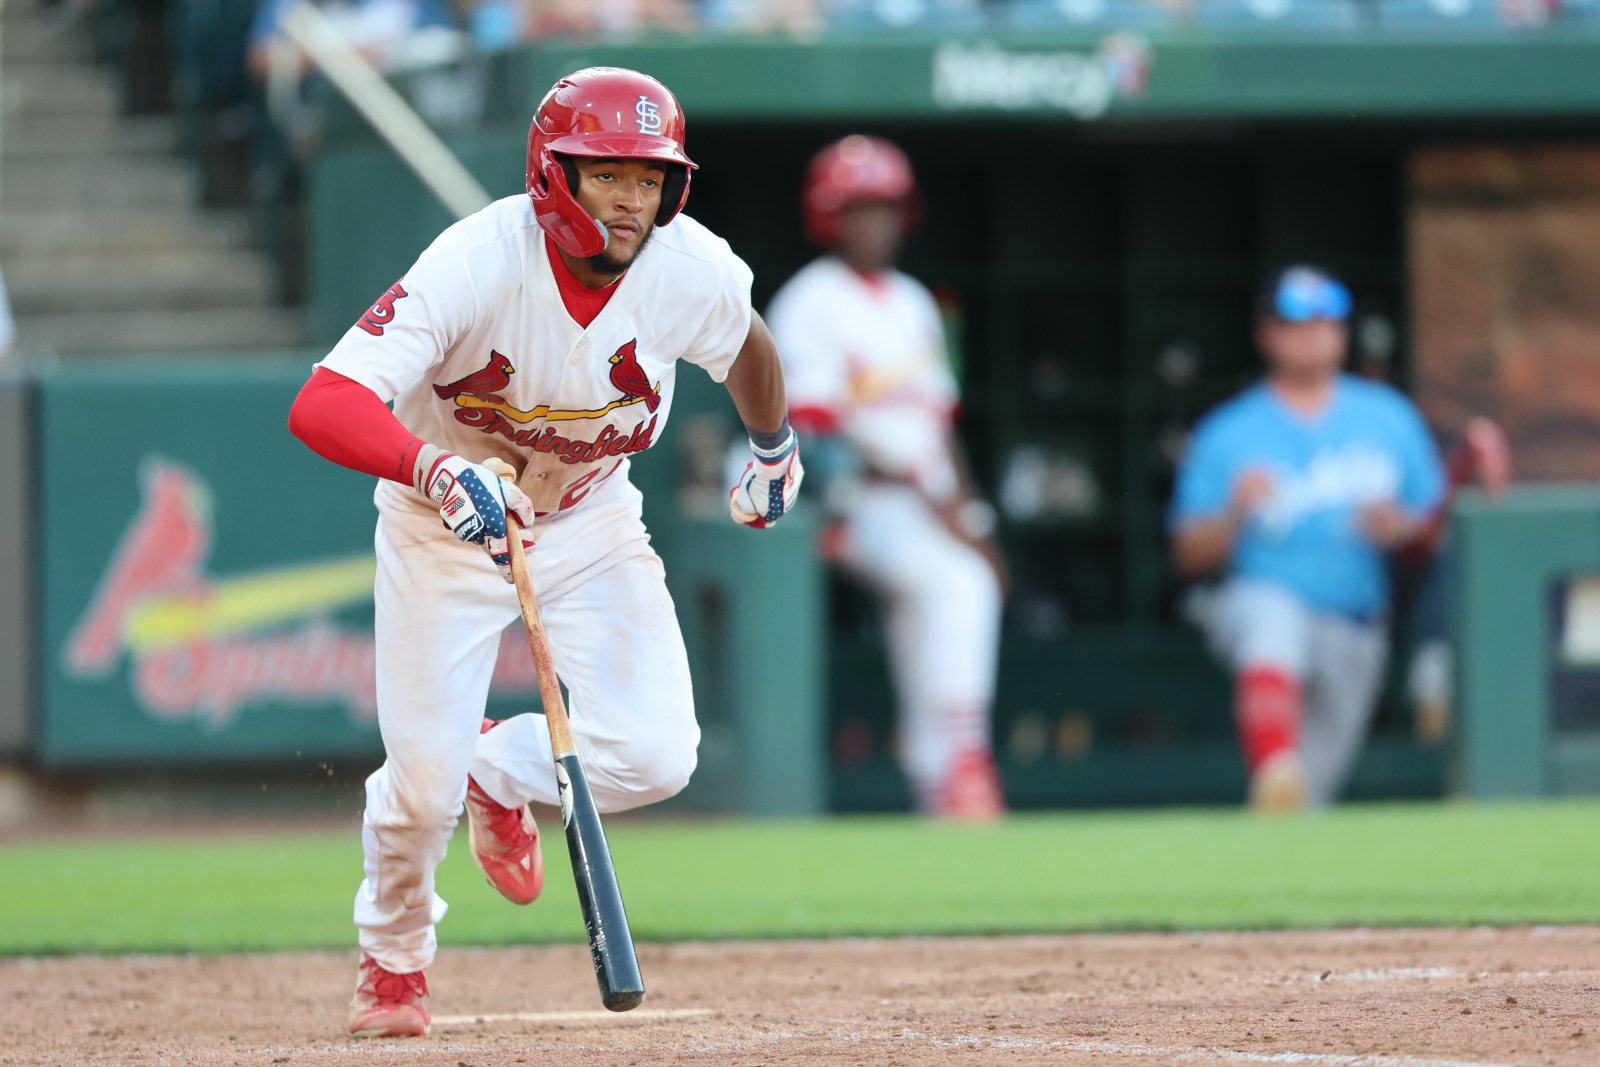 Victor Scott II, wearing a Springfield Cardinals uniform, runs to first base after hitting the ball during a game at Hammons Field in Springfield, Missouri.